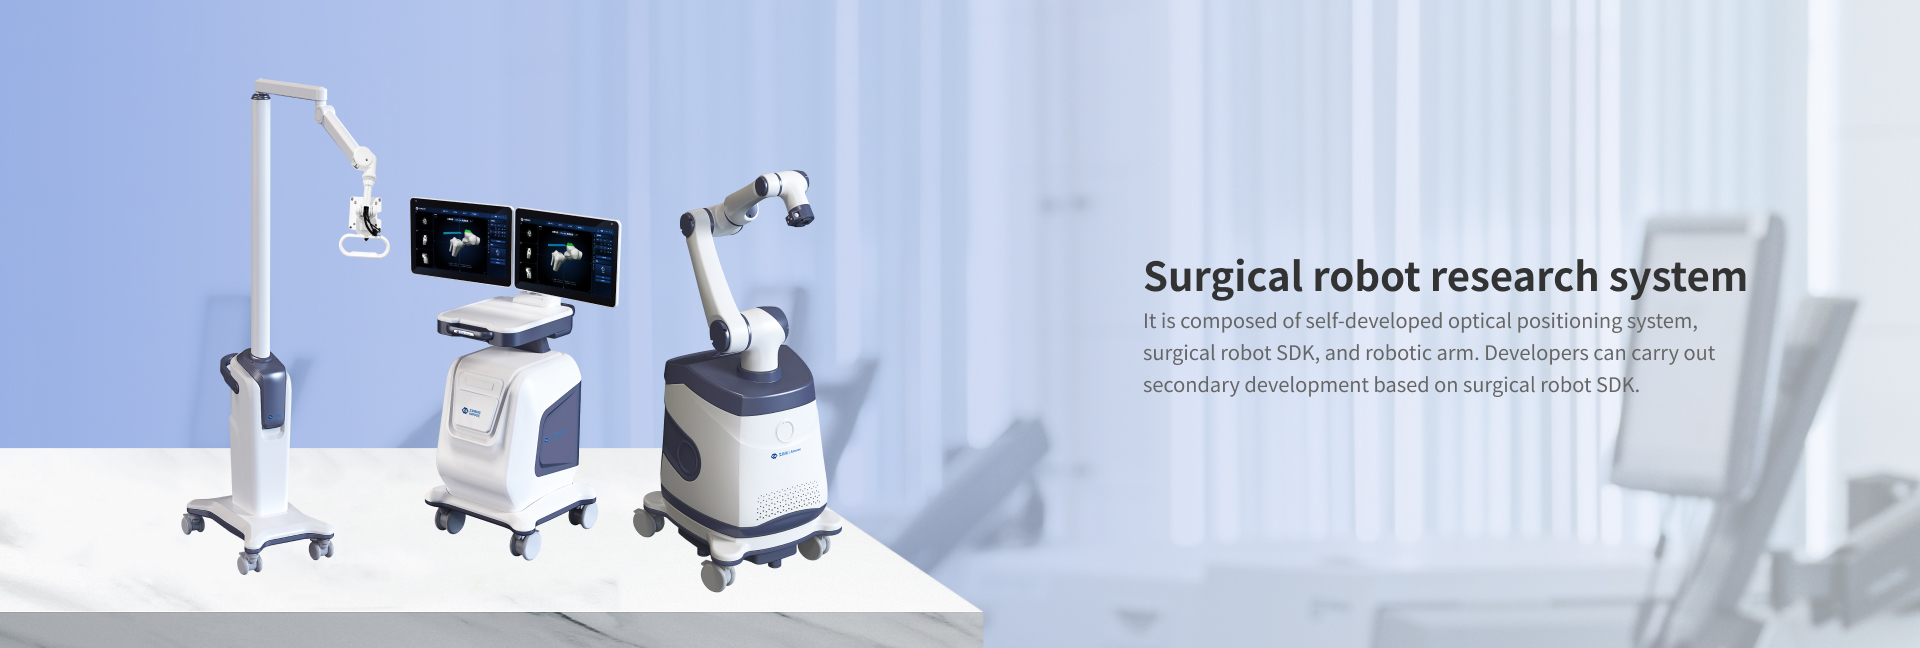 Surgical robot research system